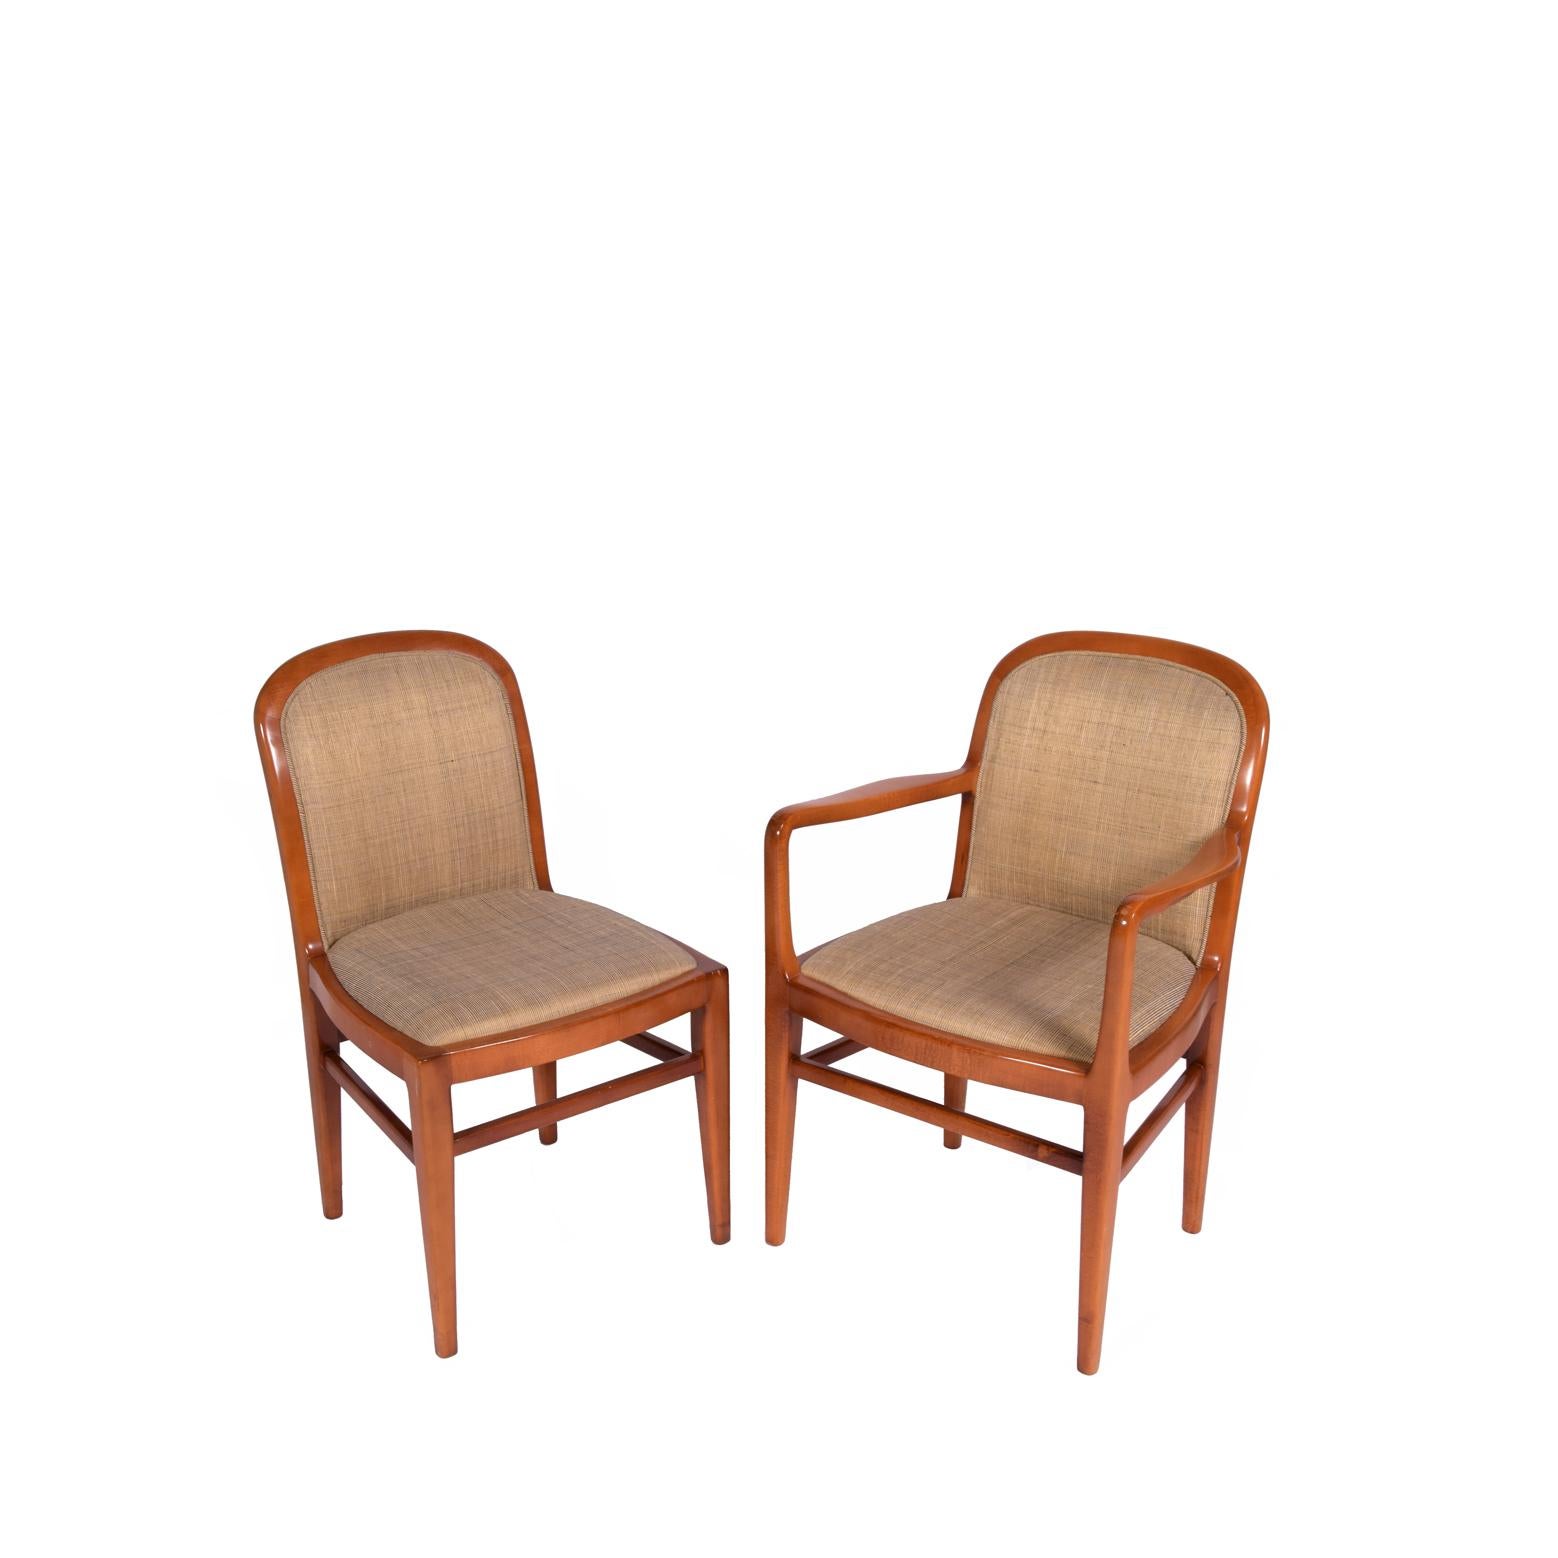 American Jack Lenor Larsen 6 sides 2 arm Chairs For Sale